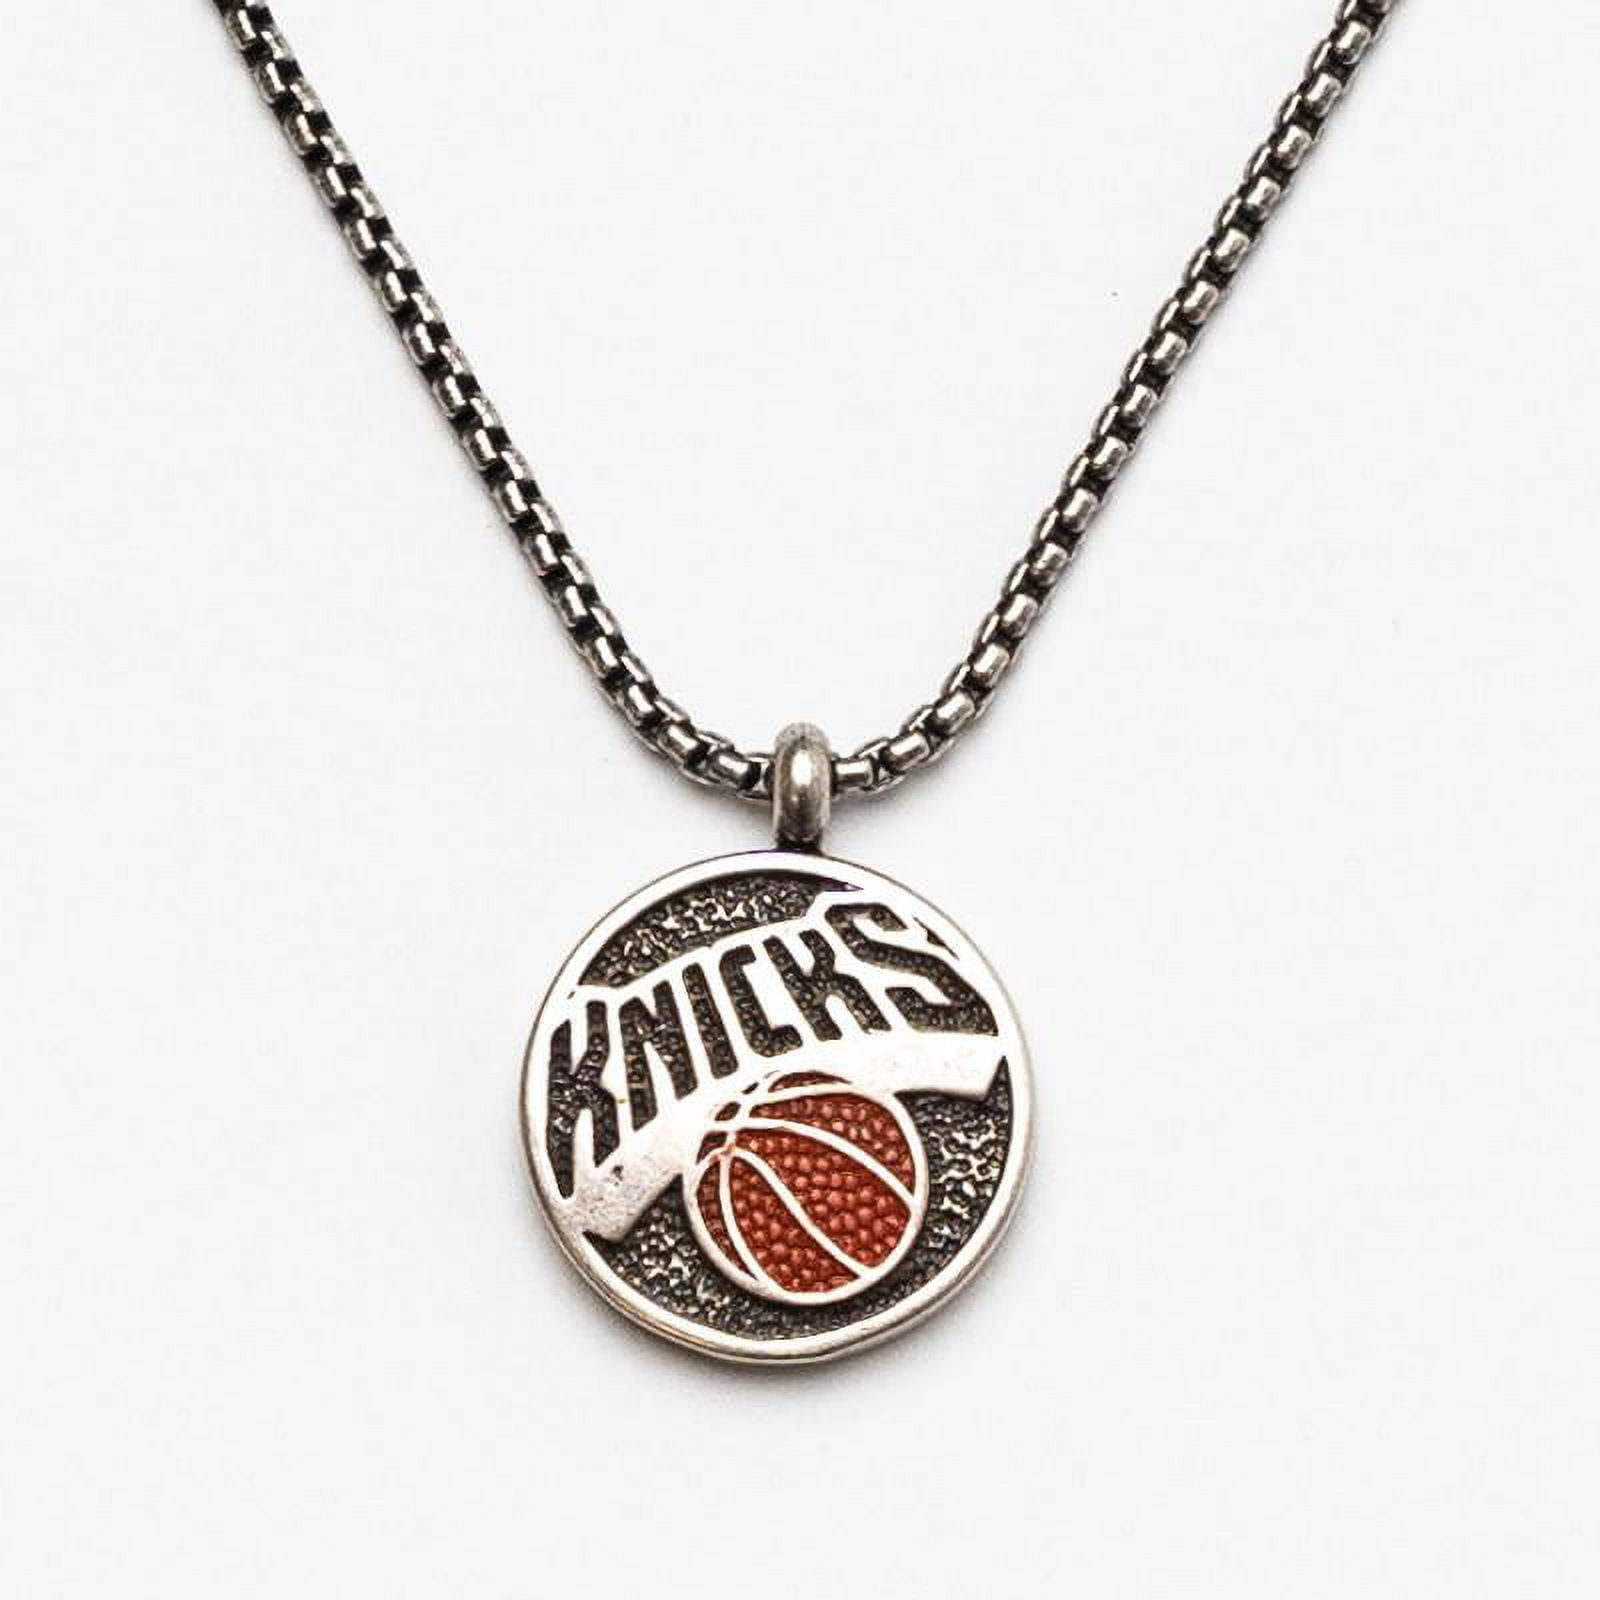 Ed Jacobs x NBA NY Knicks Silver Stainless Steel 24 Chain